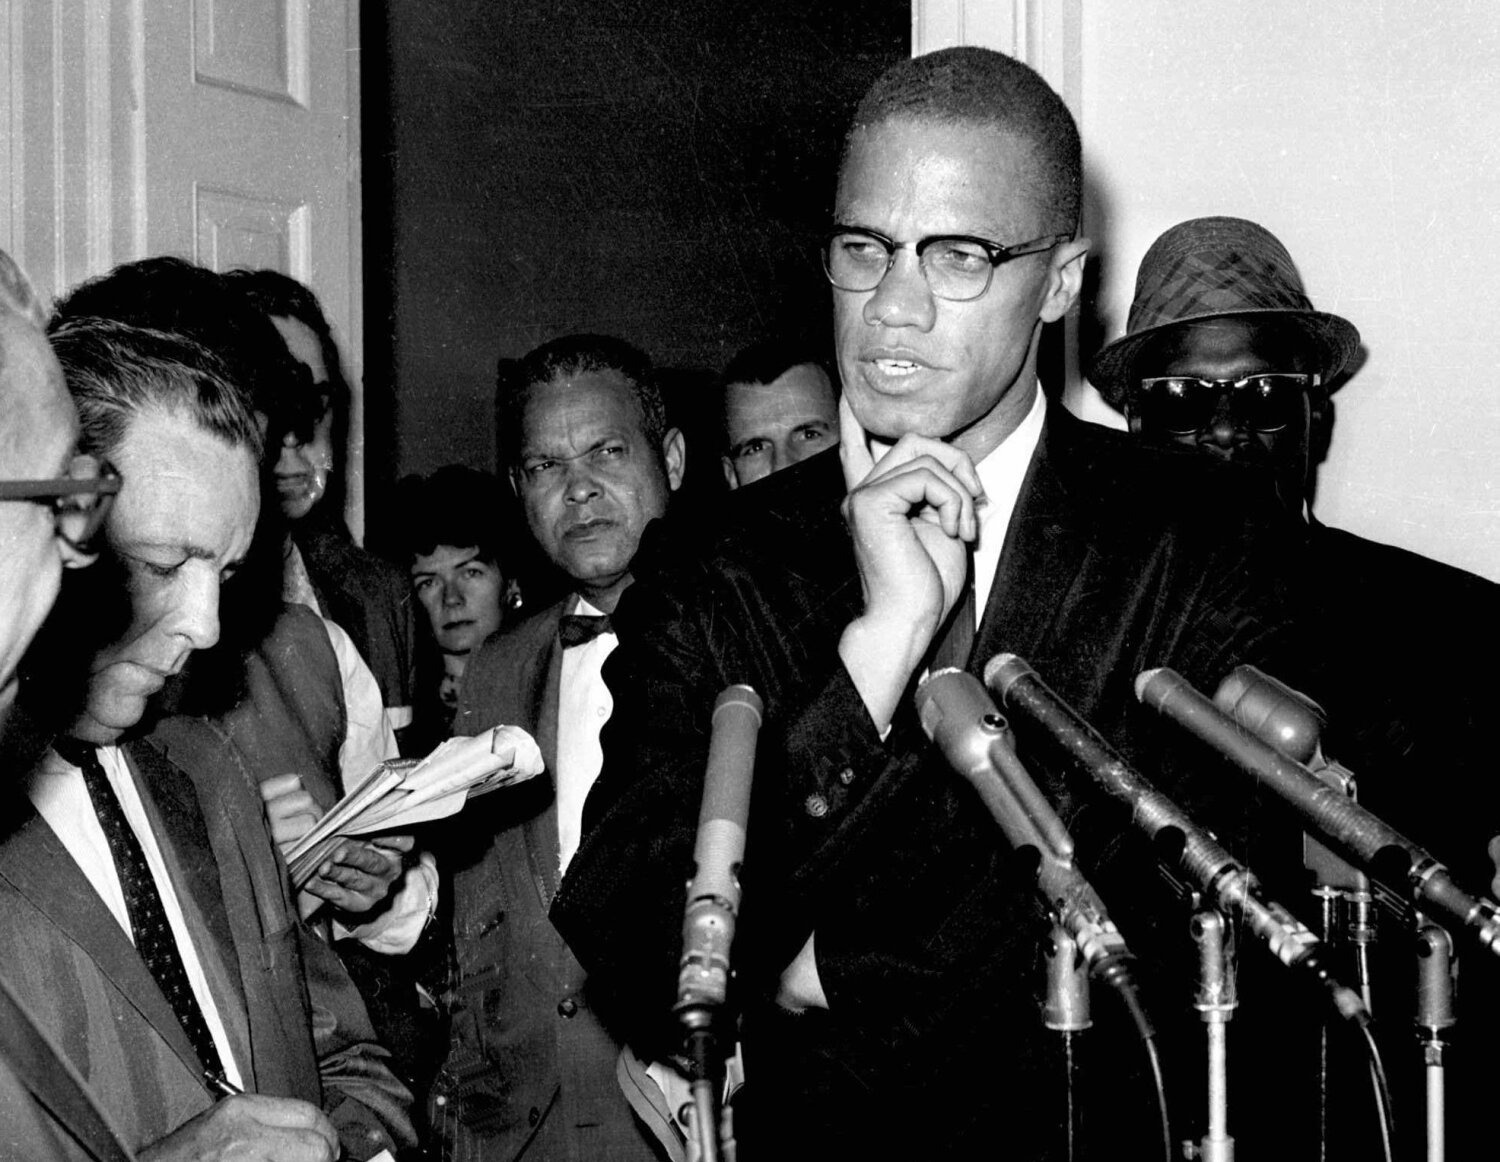 Who Killed Malcolm X? the presenter wants answers after rehabilitation